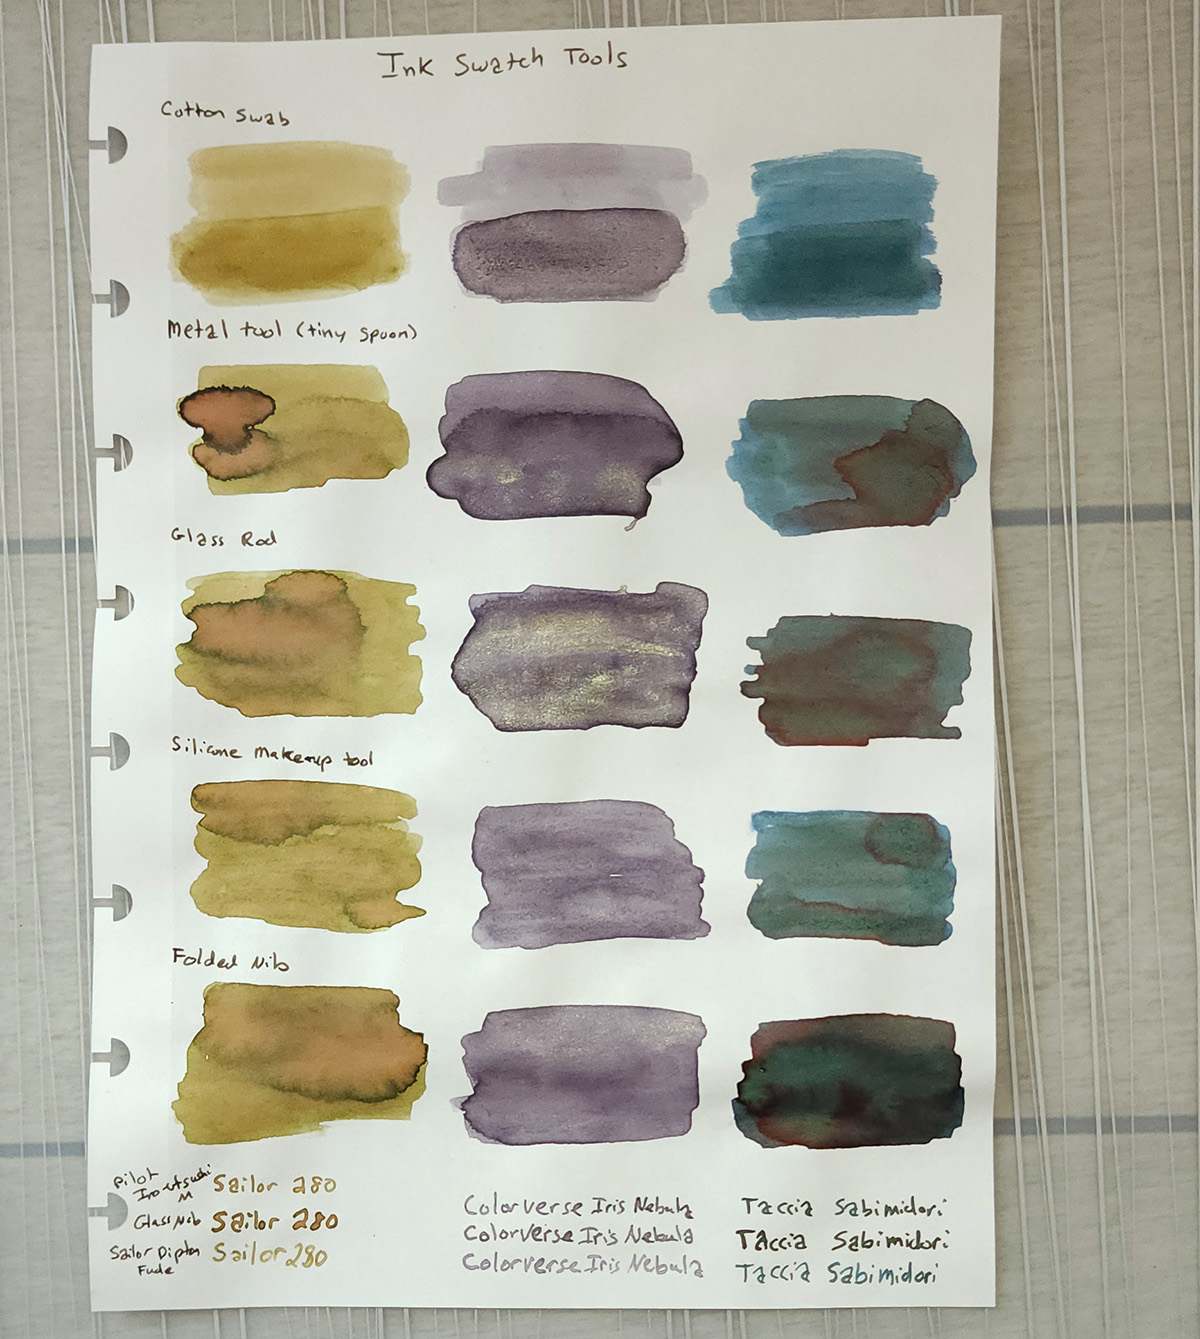 The full swatch page showing the three inks swatched with each tool side-by-side.